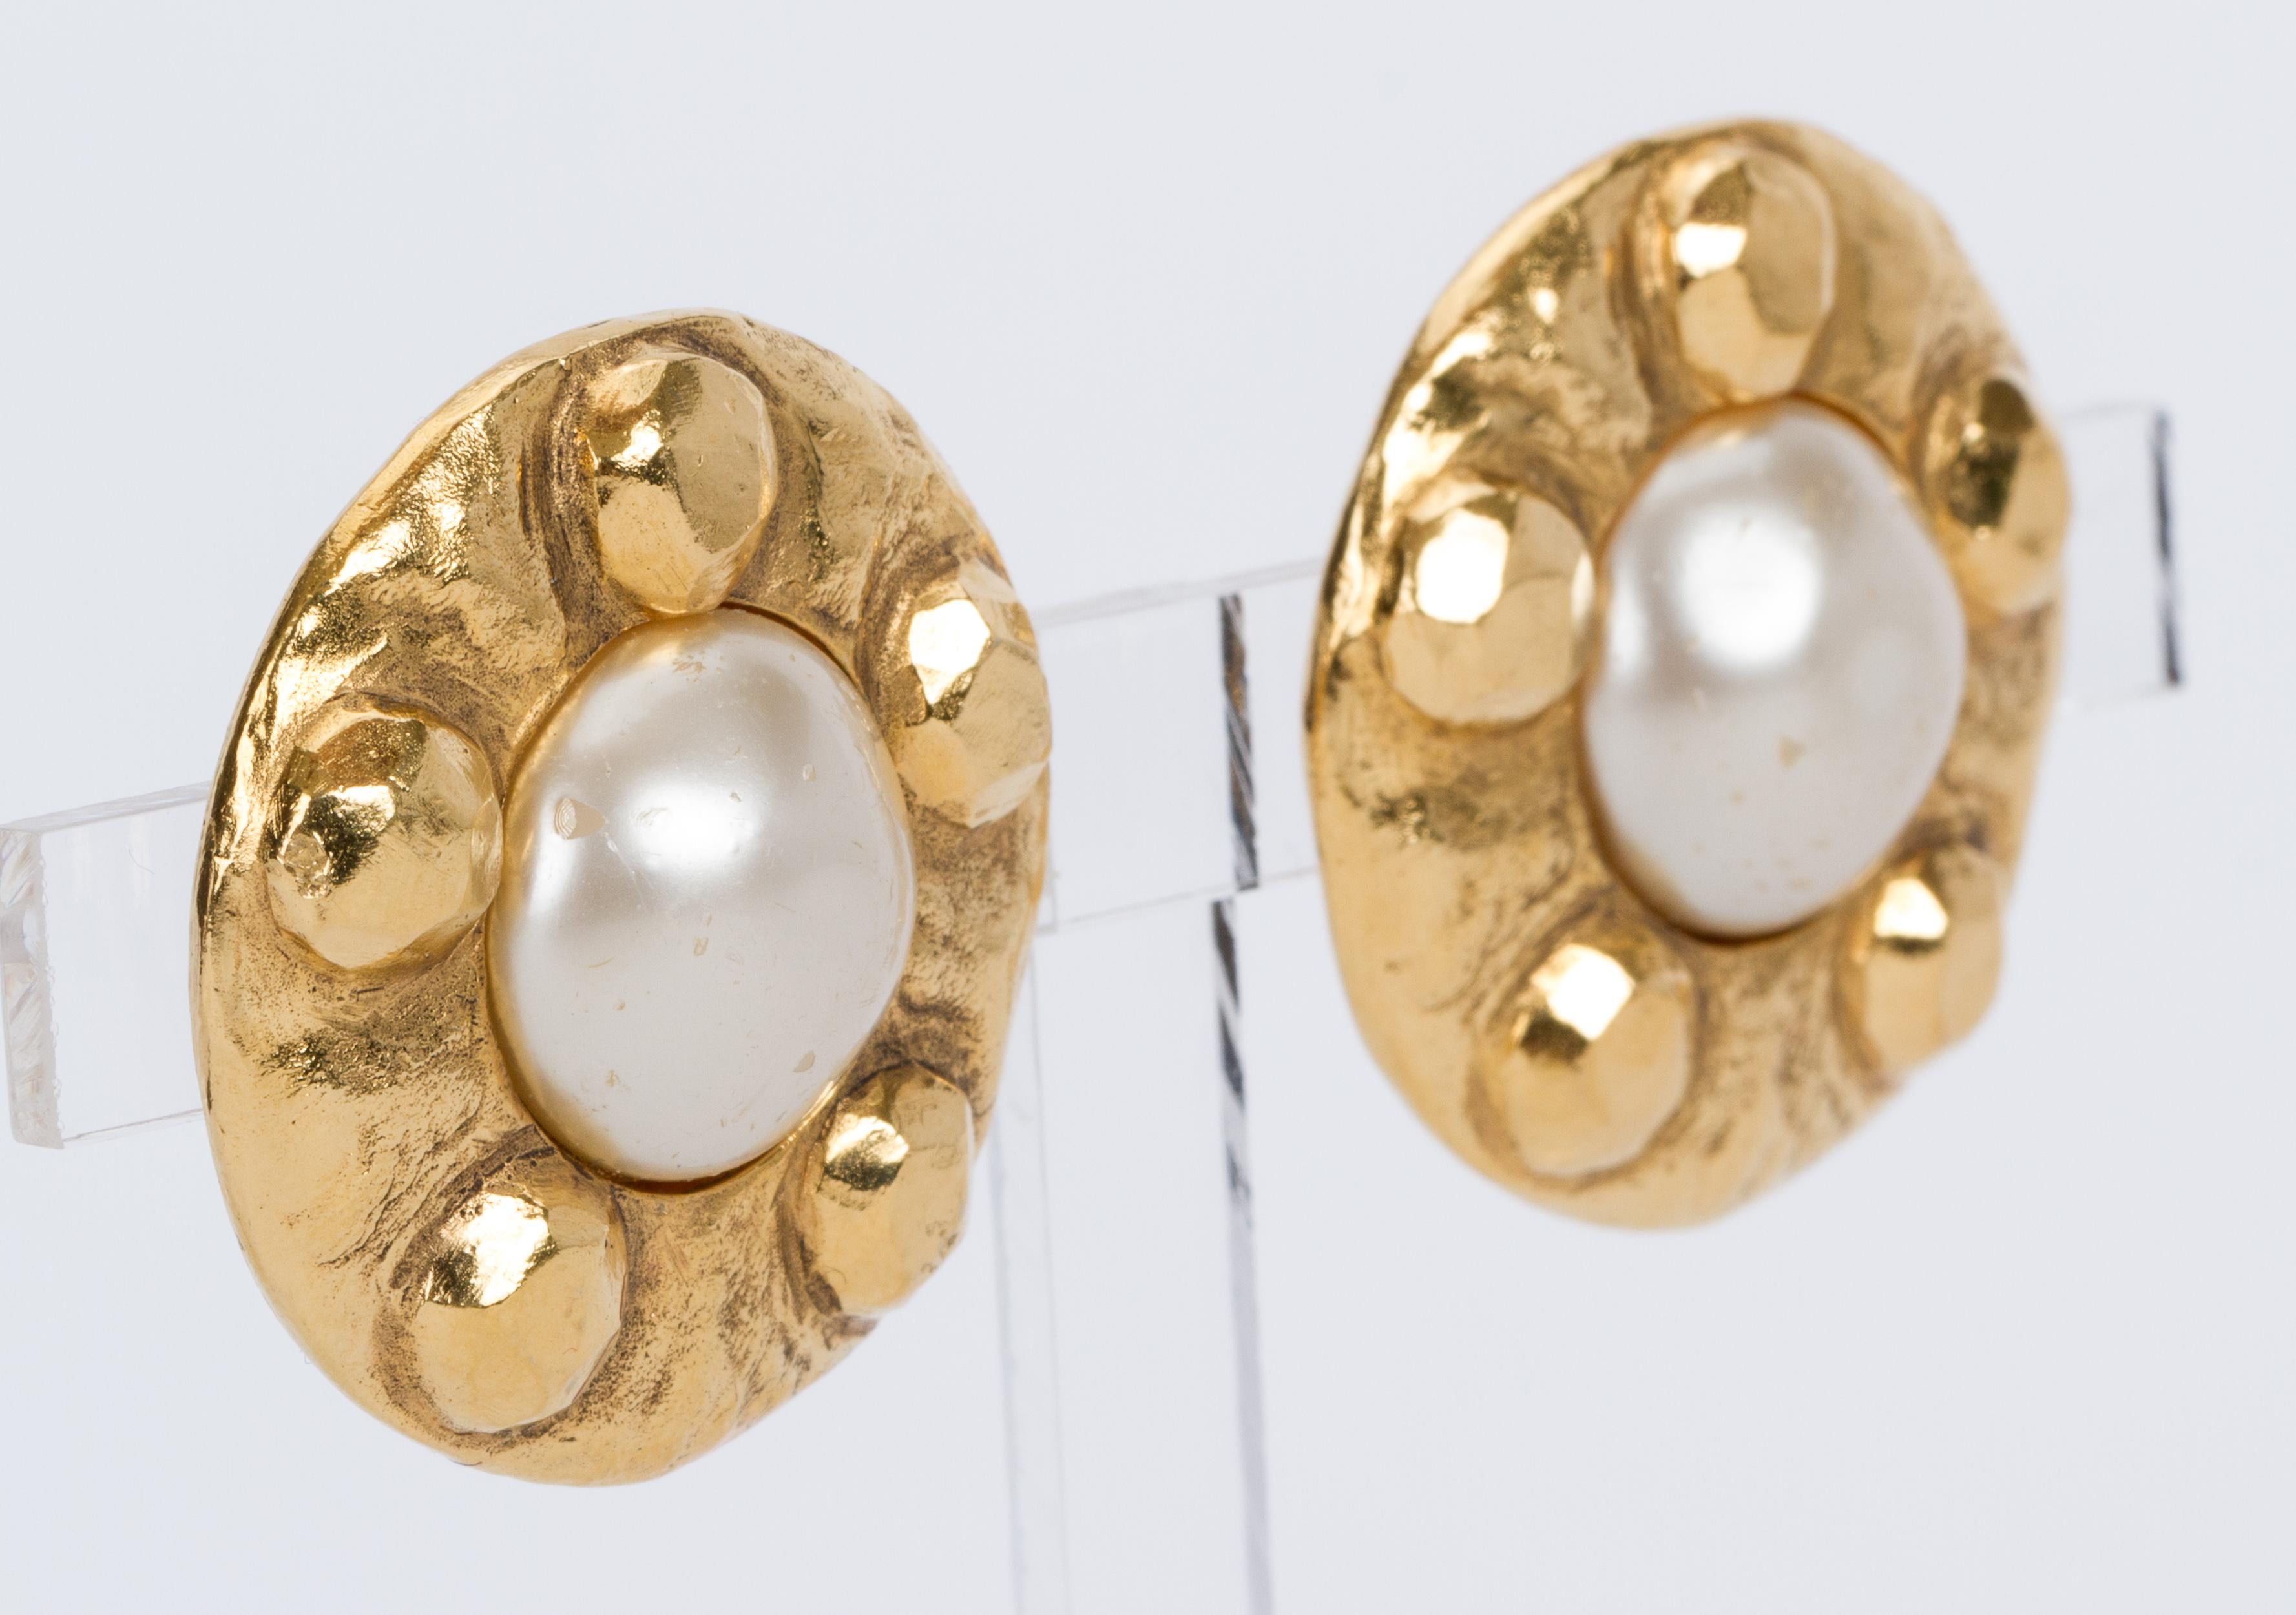 Chanel hammered goldtone metal and faux-pearl clip-back earrings. Comes with the original box or dust cover. Minor scuffs on faux-pearls.
